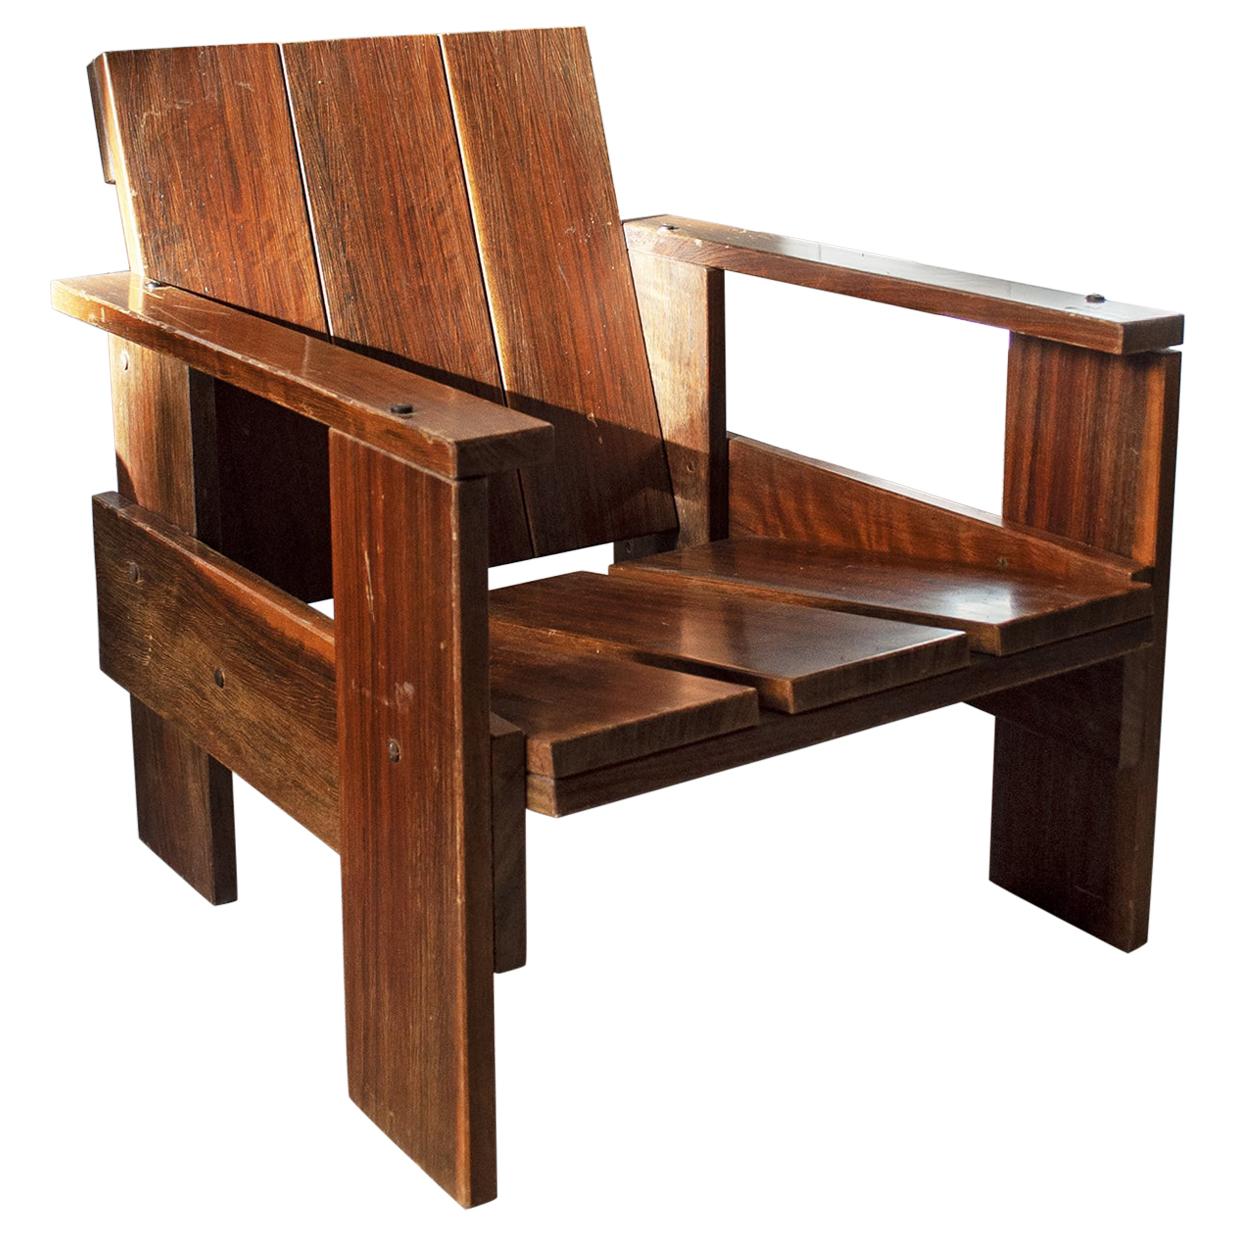 Rosewood Armchair with Brass Screws, Inspired by Gerrit Rietveld Bauhaus, 1950s For Sale